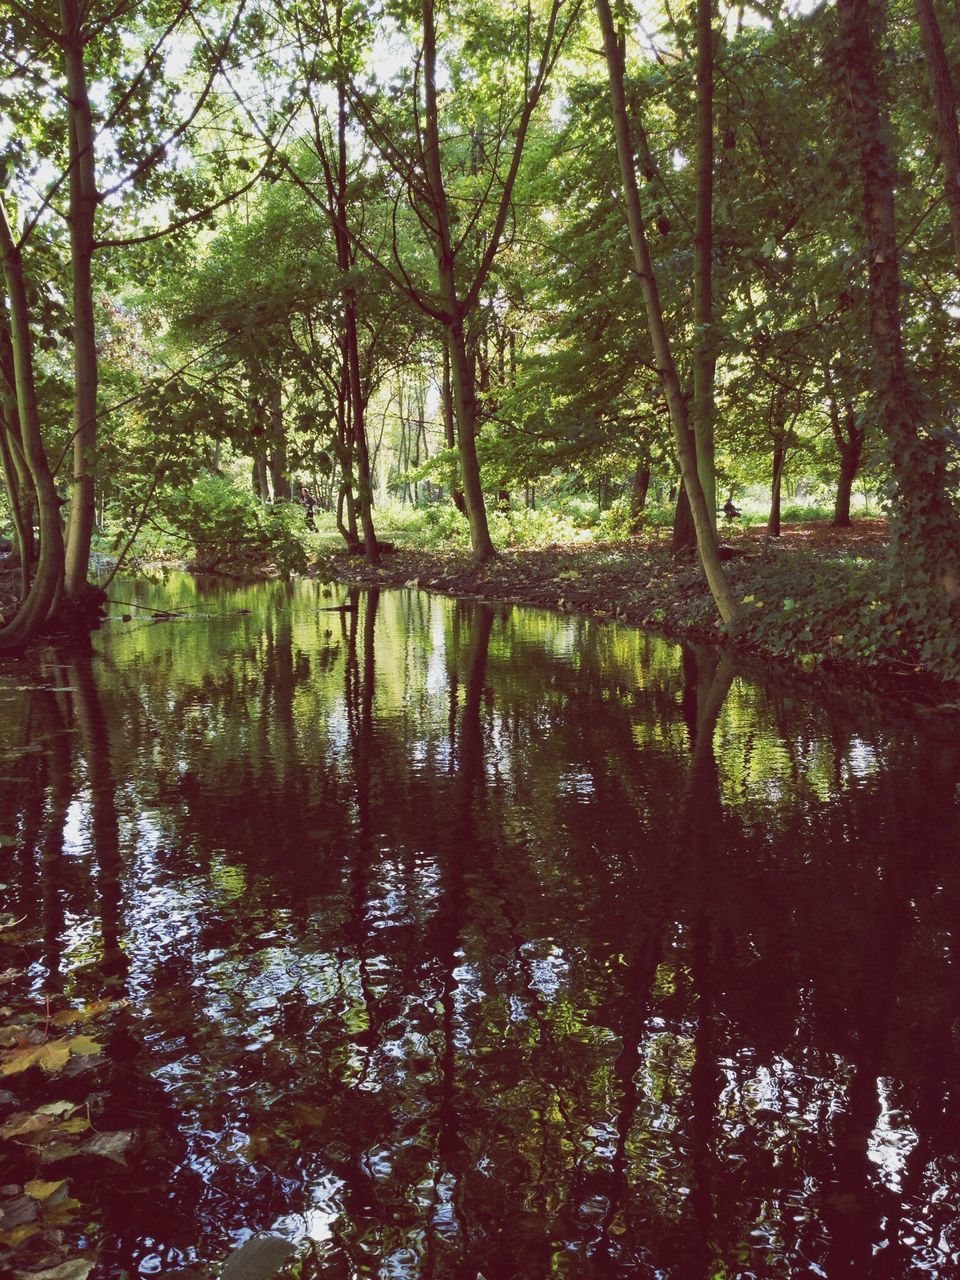 tree, water, forest, tranquility, tranquil scene, beauty in nature, nature, growth, scenics, waterfront, reflection, lake, tree trunk, green color, river, branch, woodland, idyllic, non-urban scene, day